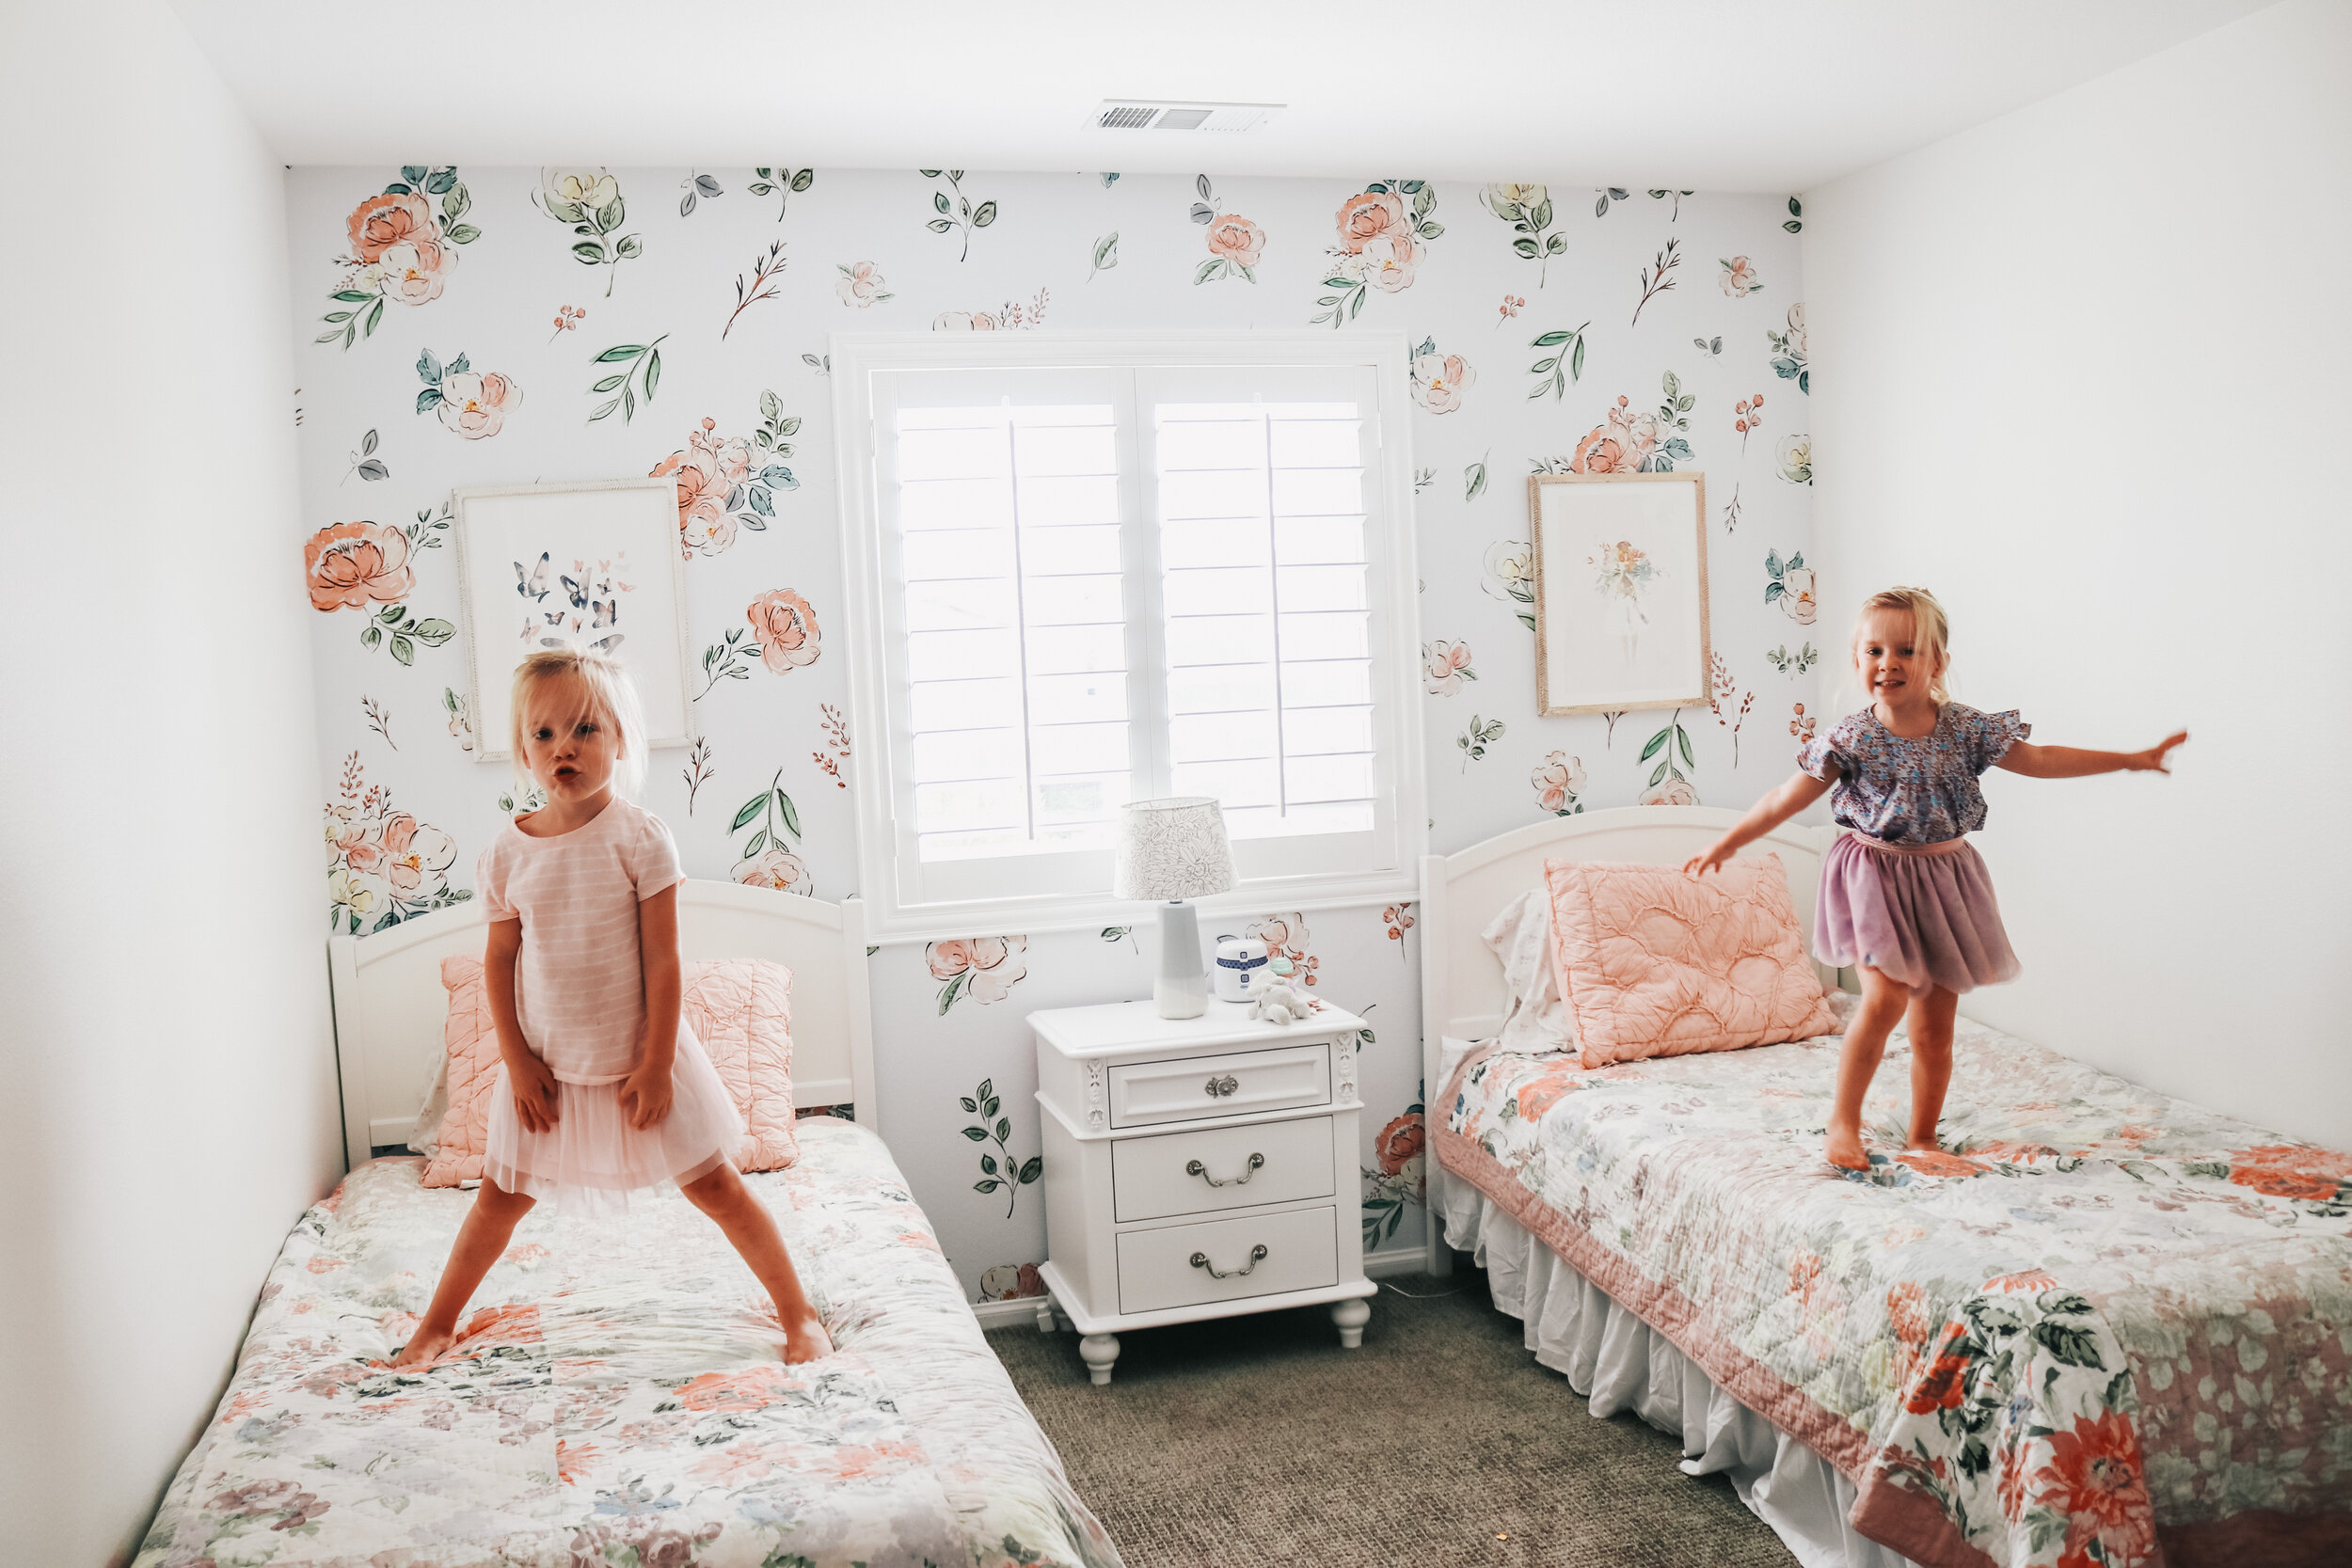 Floral Wallpaper For The Twins New Bedroom! — With Kendra